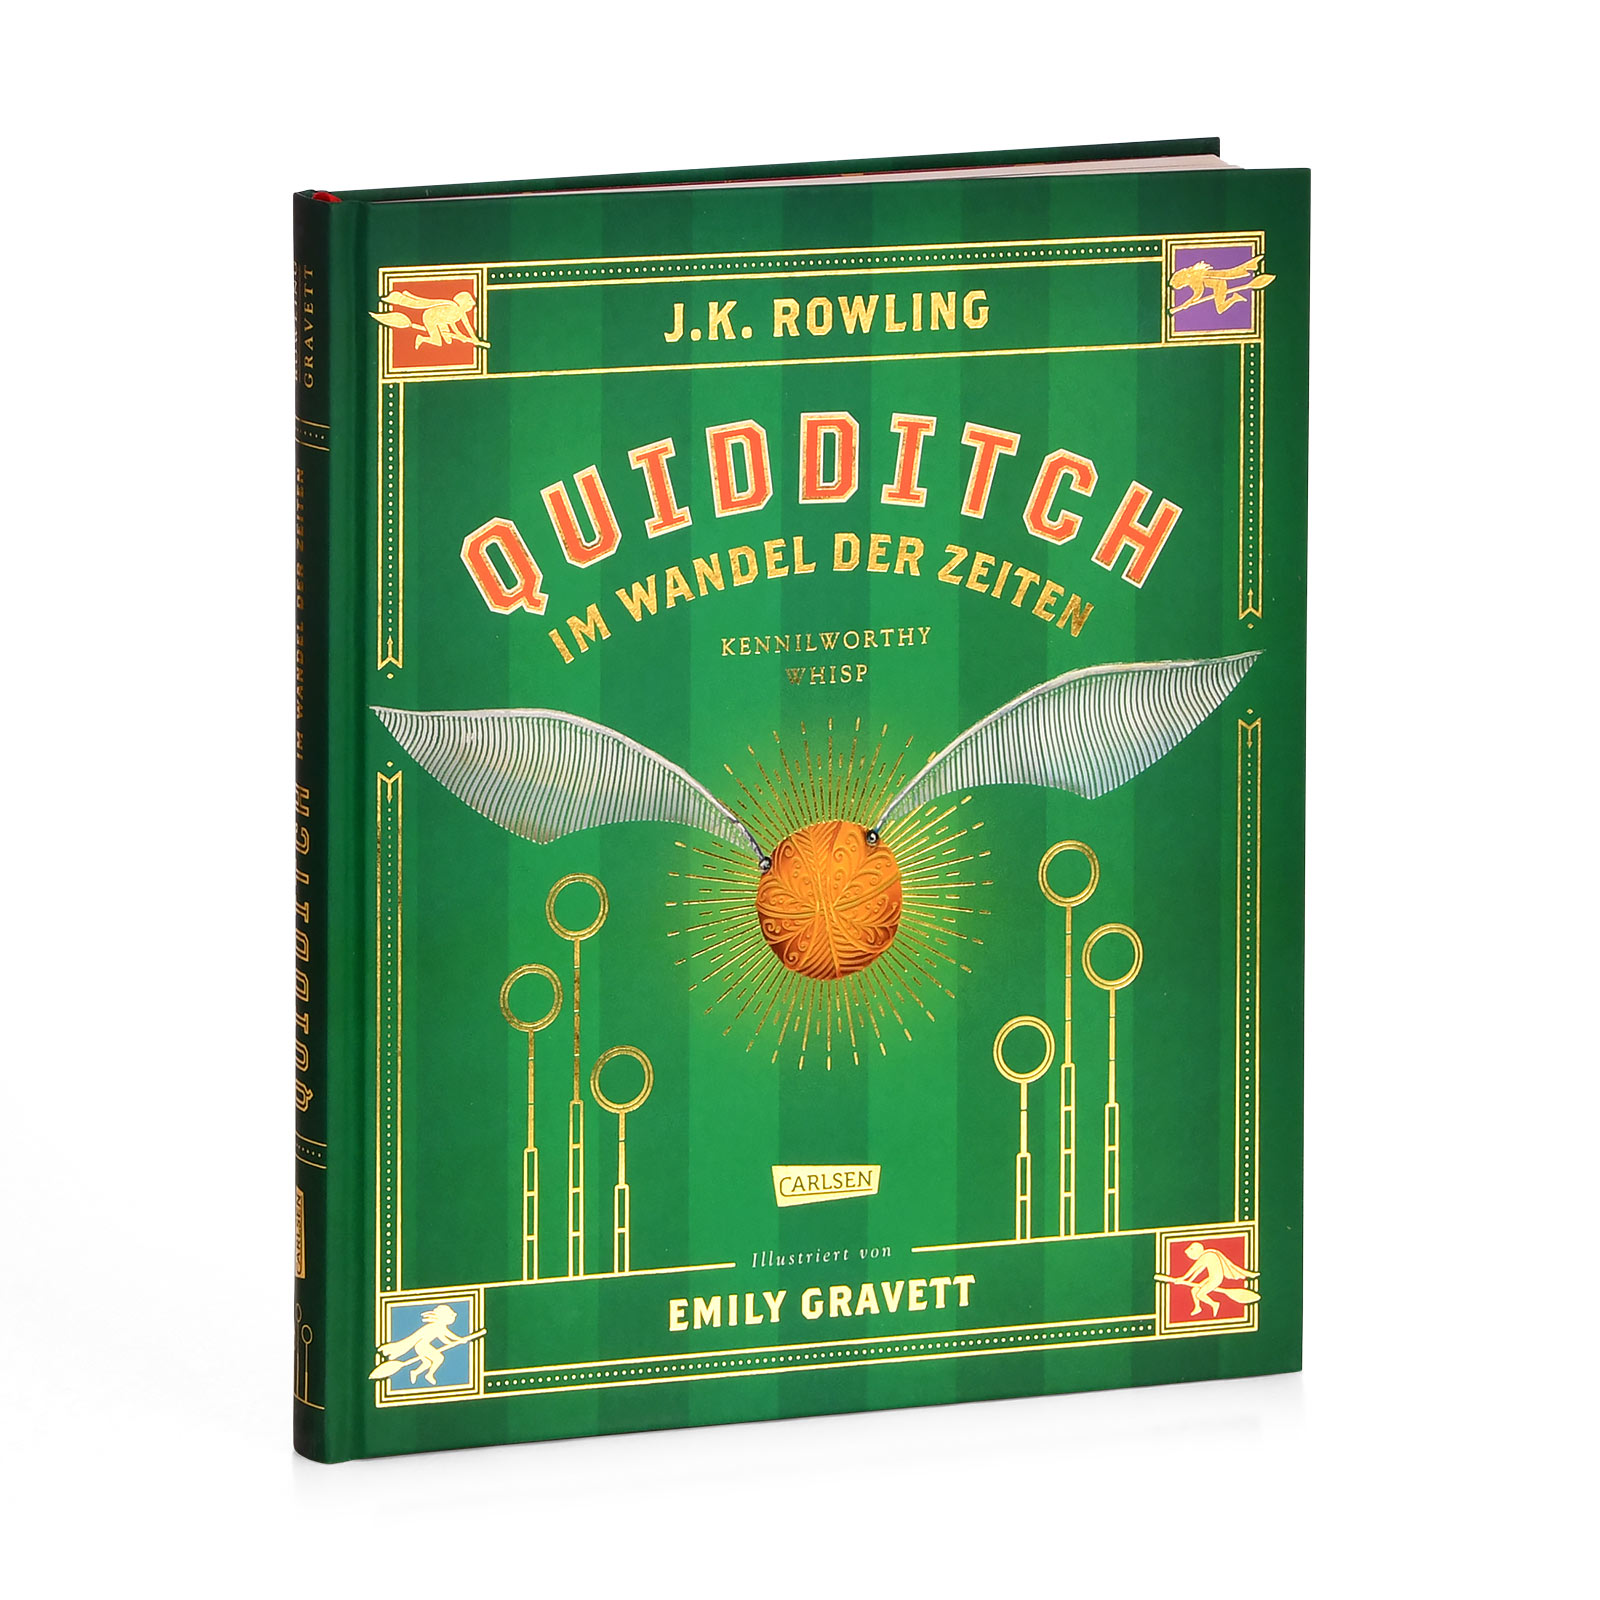 Quidditch Through the Ages - Deluxe Edition